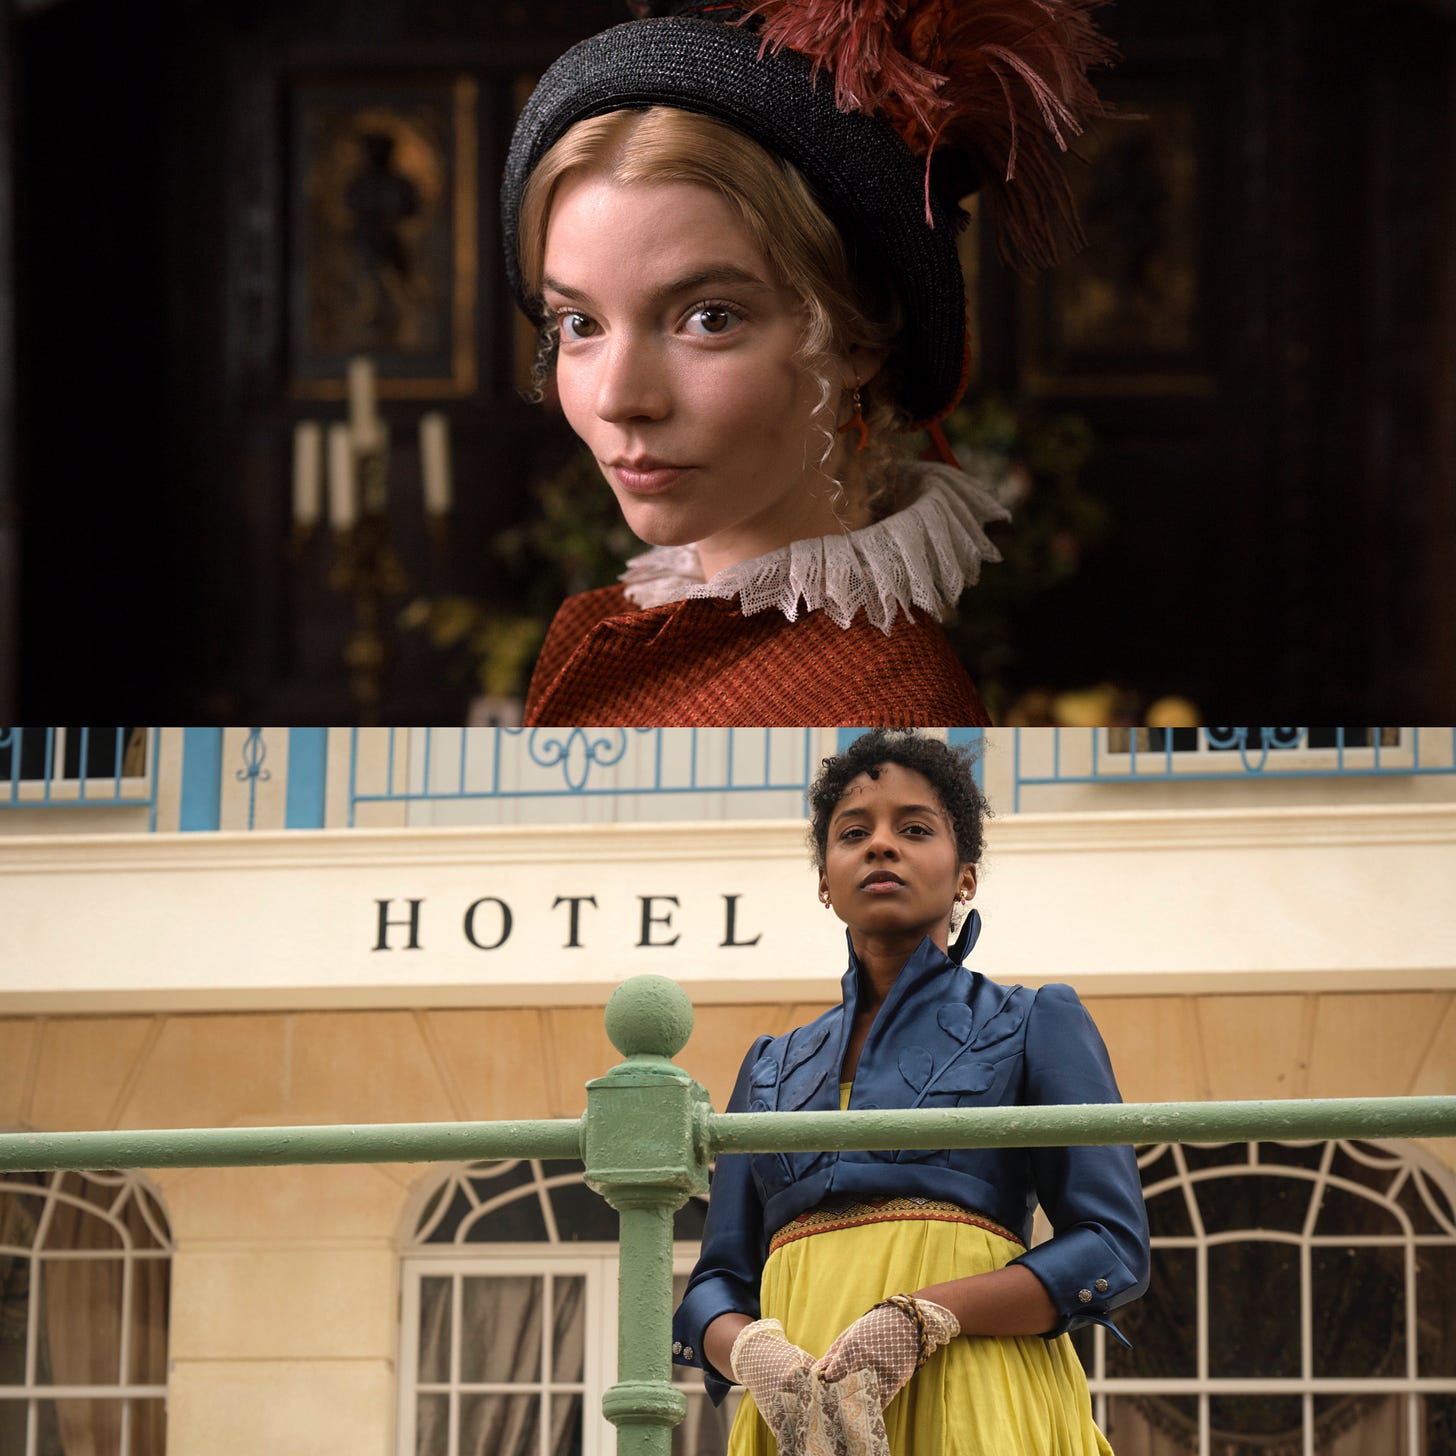 A collage of portraits of Emma Woodhouse, top, and Georgiana Lambe, below, as portrayed by actors Anya Taylor-Joy and Crystal Clarke, with the caption: Young, powerful heroines are a rarity in Jane Austen and in the Regency - but they can be found, in Emma Woodhouse, portrayed by Anya Taylor Joy in Autumn De Wilde’s 2020 film adaptation of ‘Emma,’ and in the ‘Sanditon’ character of Miss Georgiana Lambe, portrayed by Crystal Clarke in PBS’s series. 